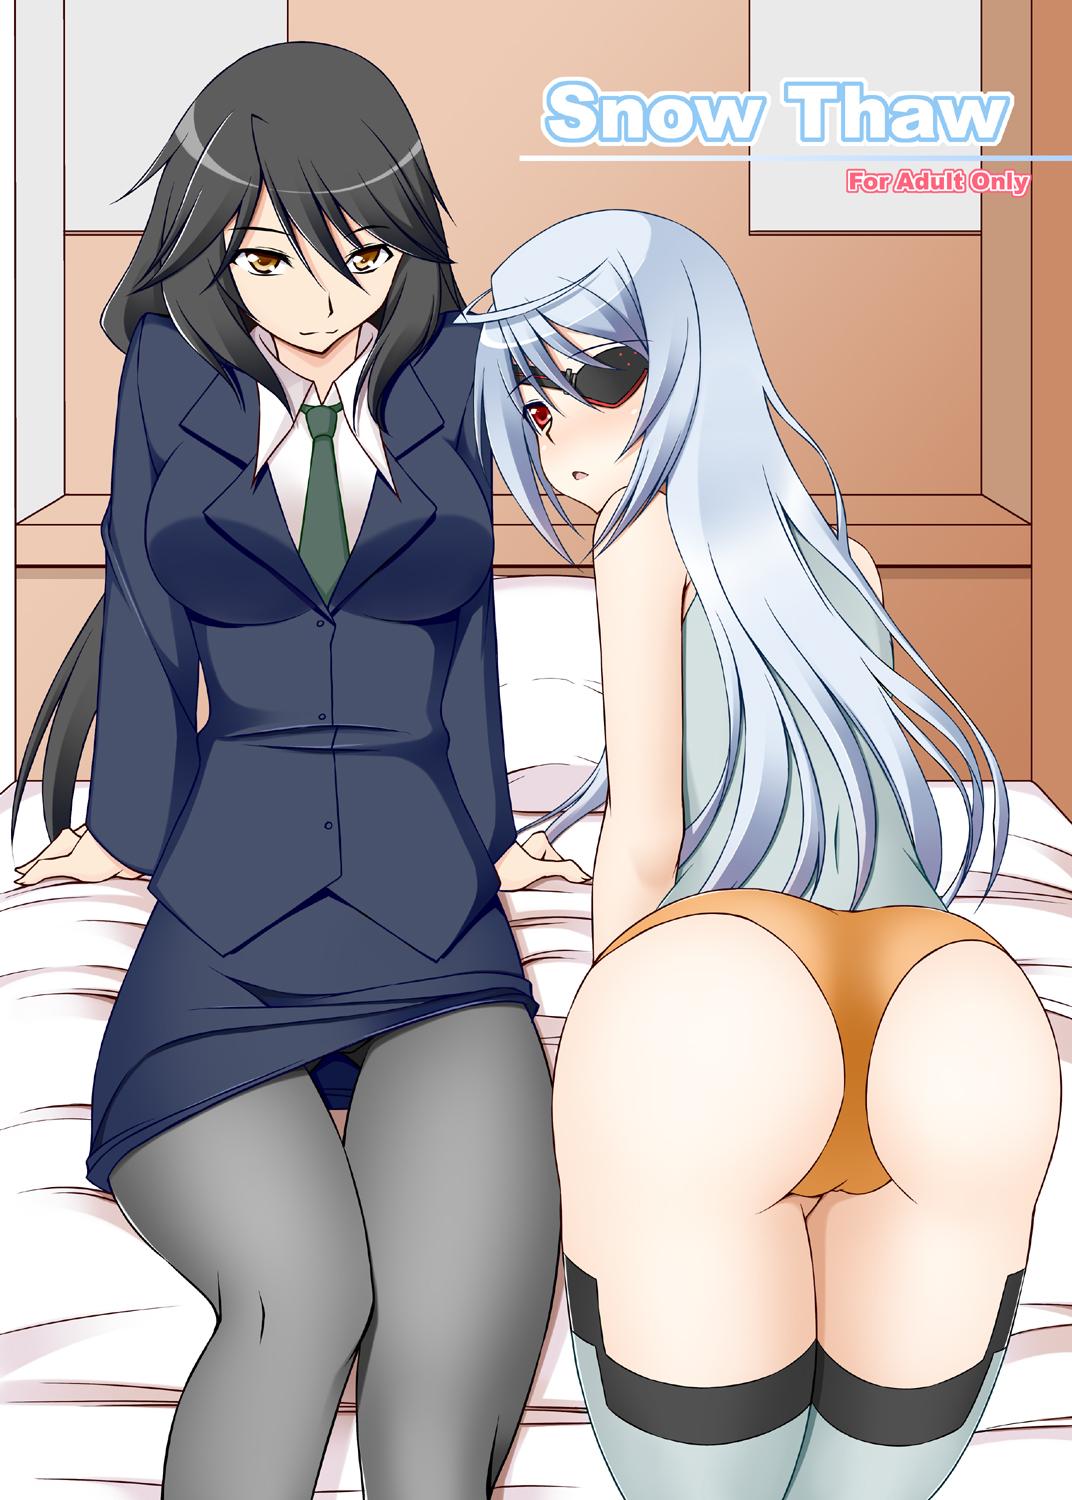 Bang Bros Snow Thaw - Infinite stratos Africa - Page 1